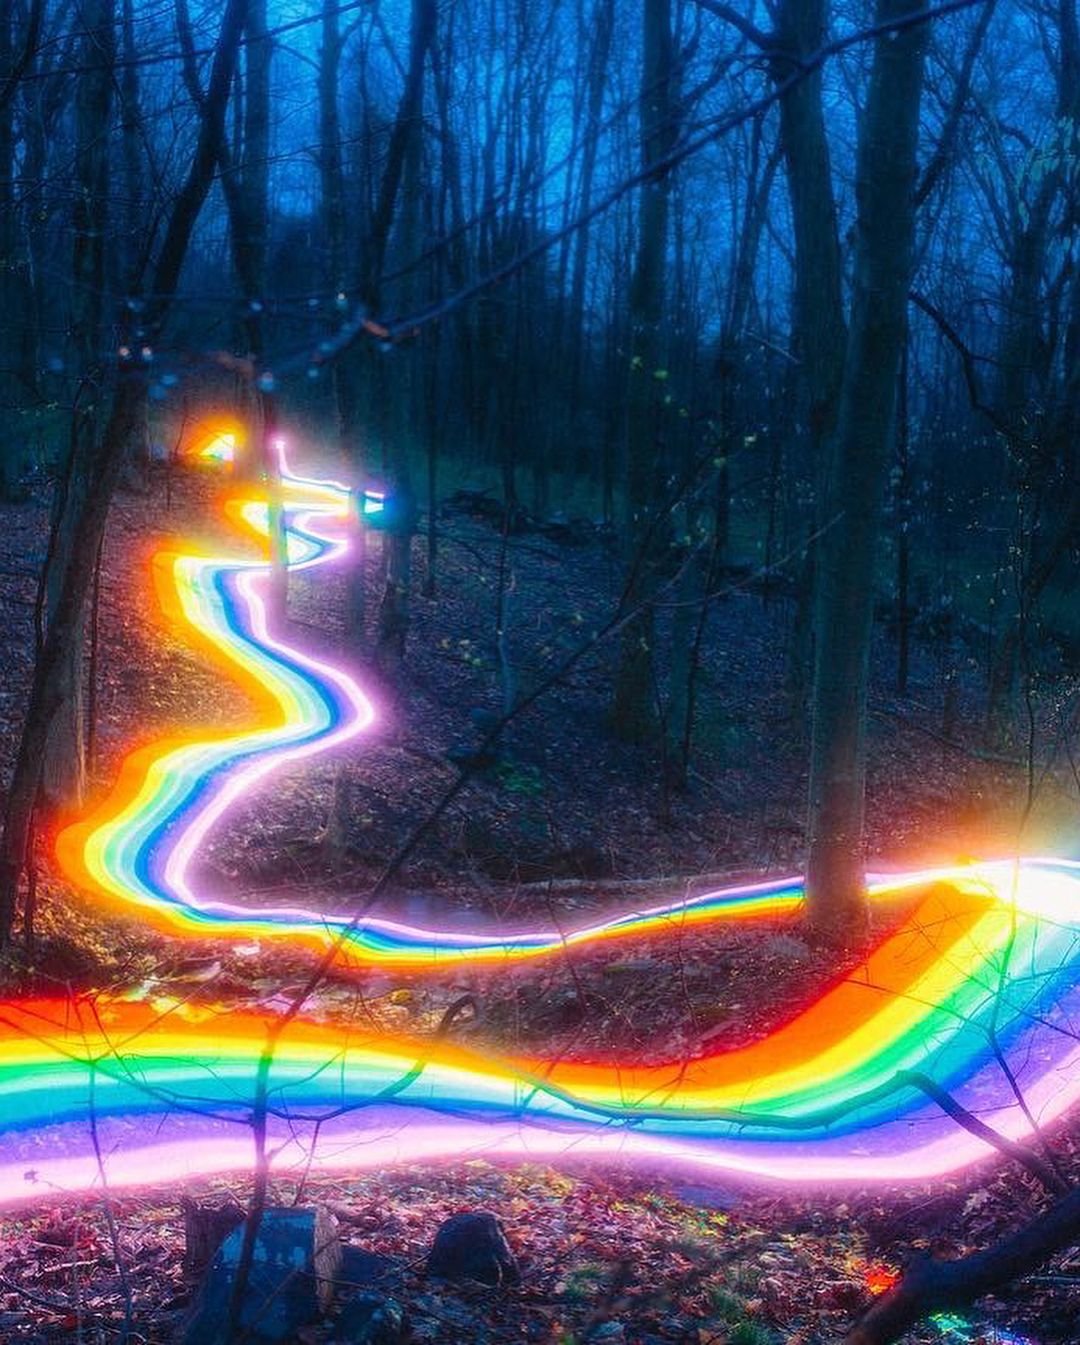 rainbow road has been traversing rocky creeks, exploring sheds, winding around lakes, and into the hearts of. Rainbow road, Rainbow aesthetic, Rainbow wallpaper